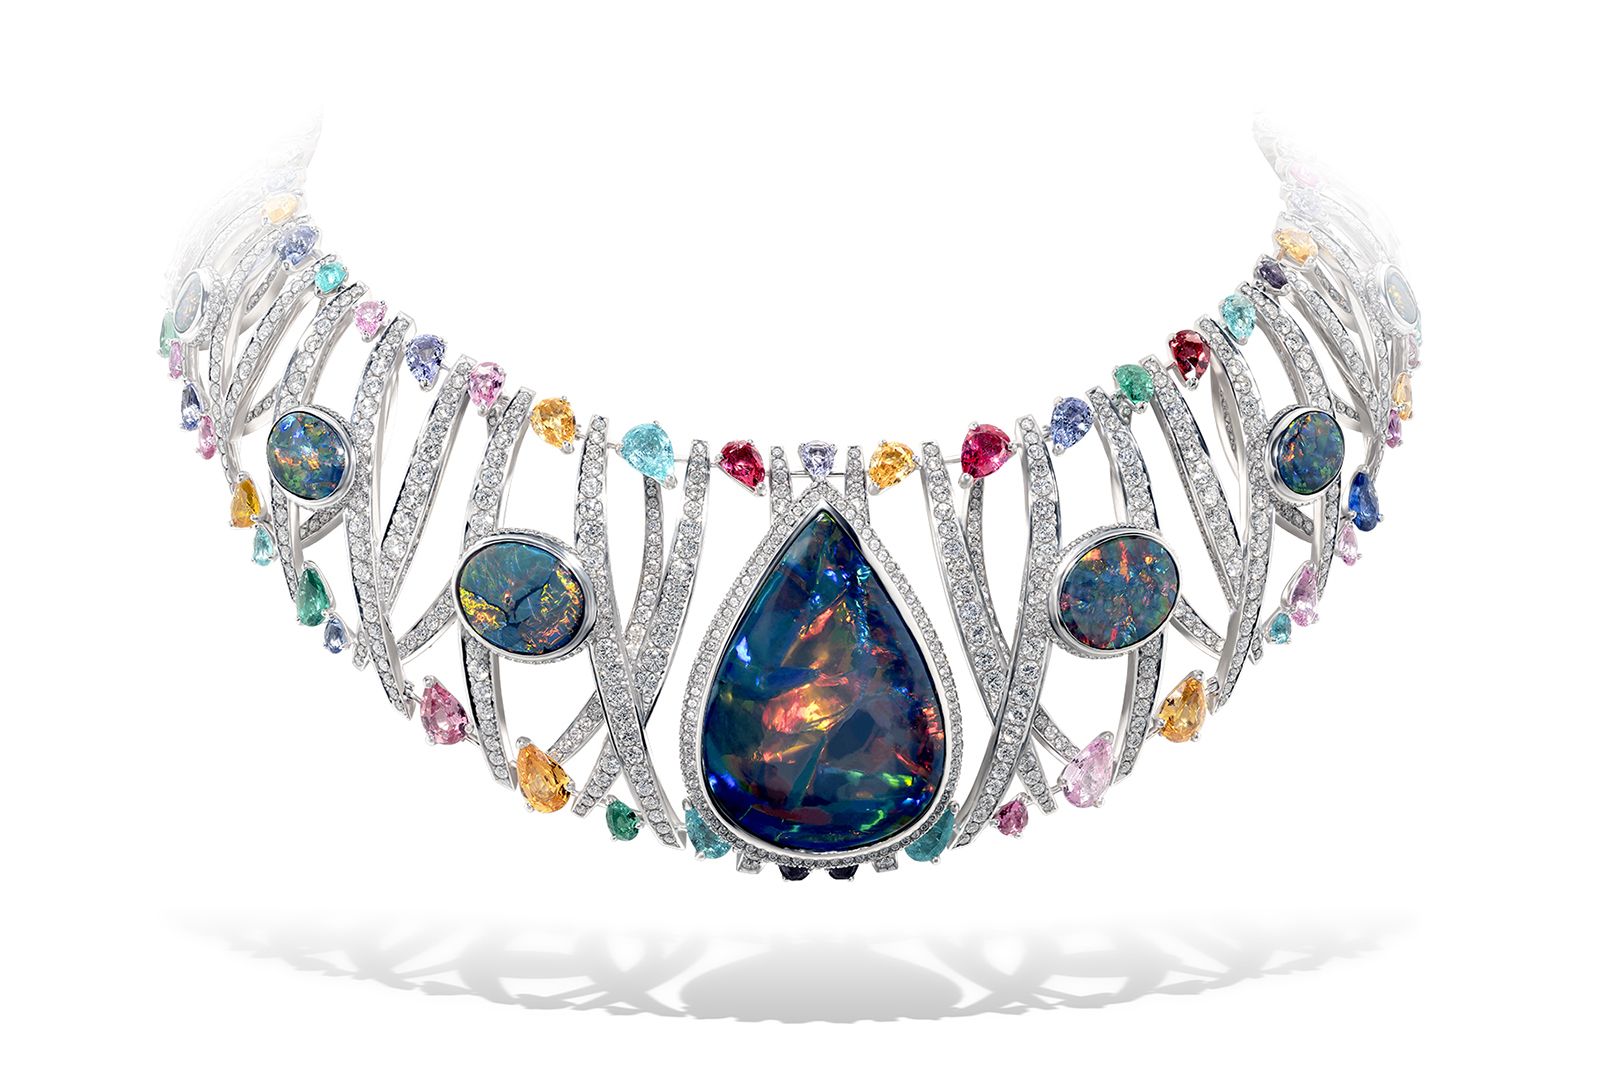 Sparkle and shine: The most dazzling high jewellery collections of